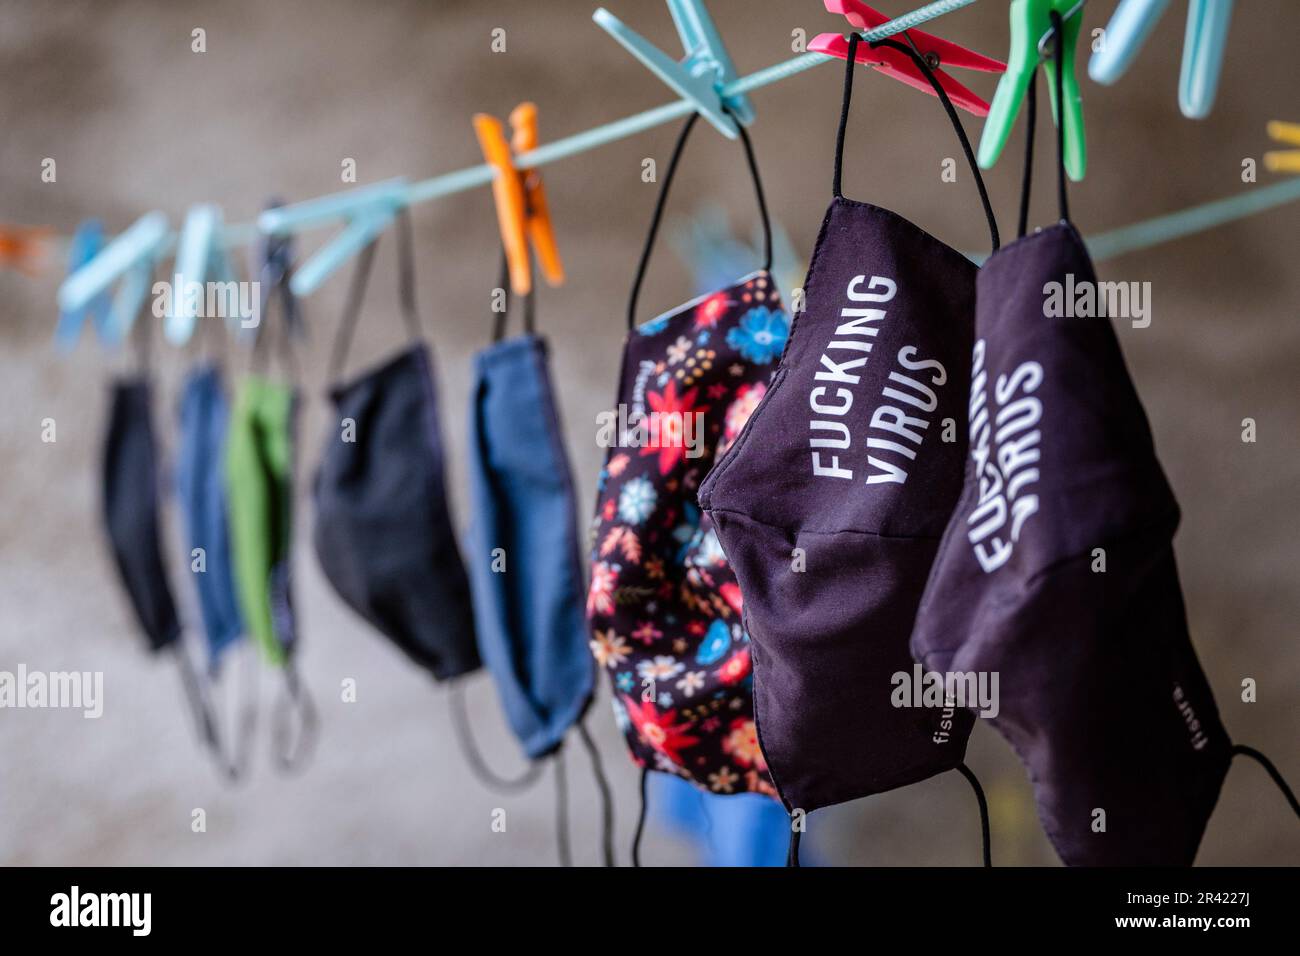 laundry of anti-virus masks hanging in a dryer. Stock Photo